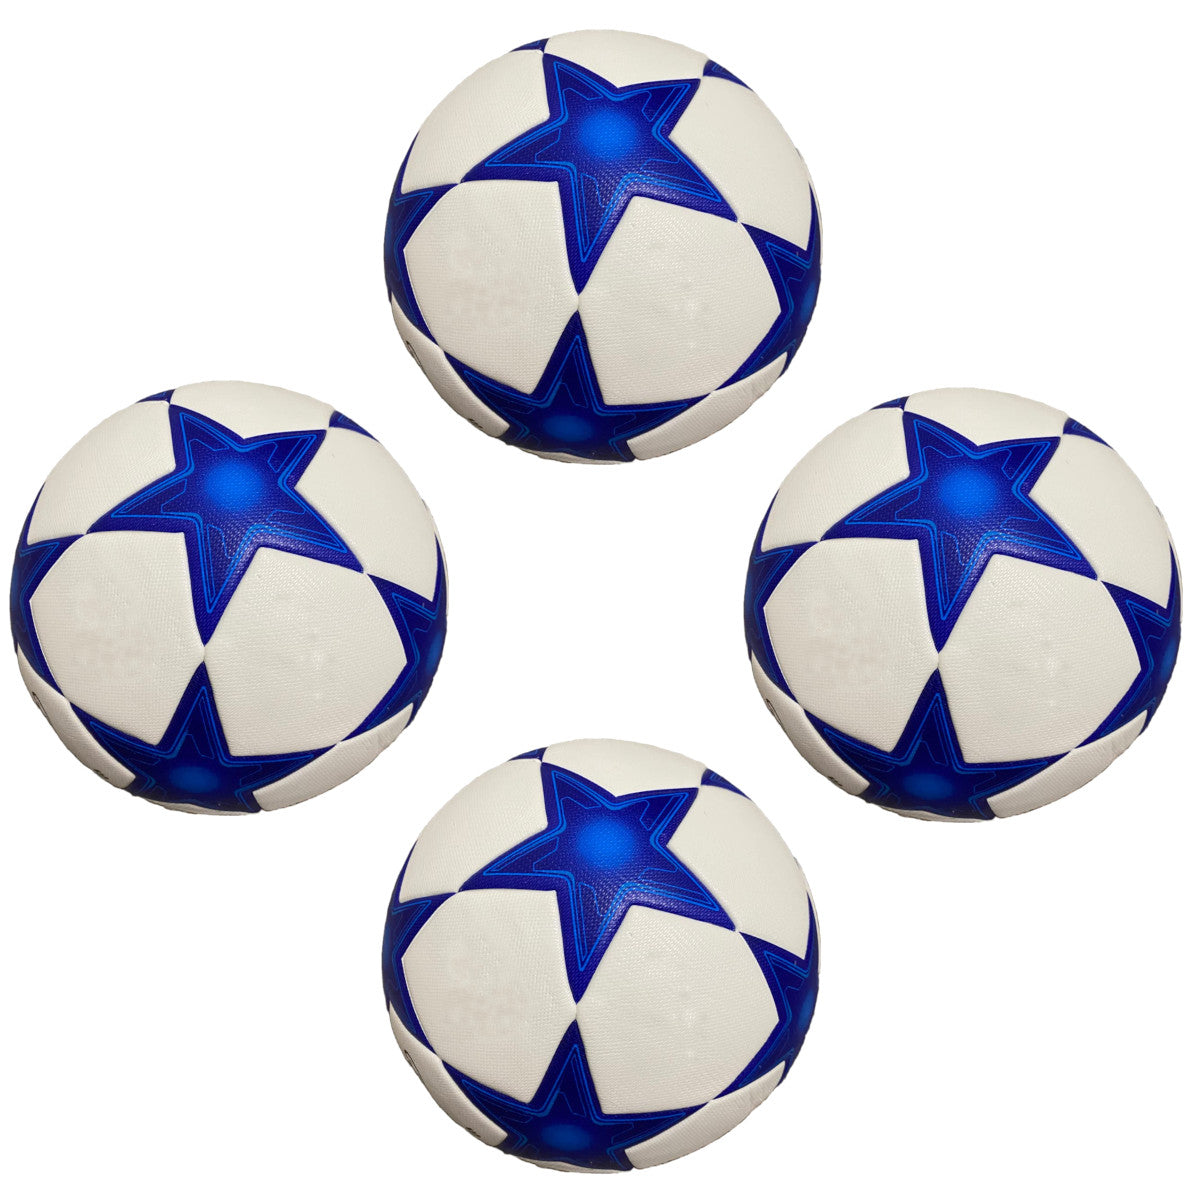 Pack of 10 Training or Game Soccer Balls Size 5 Blue White